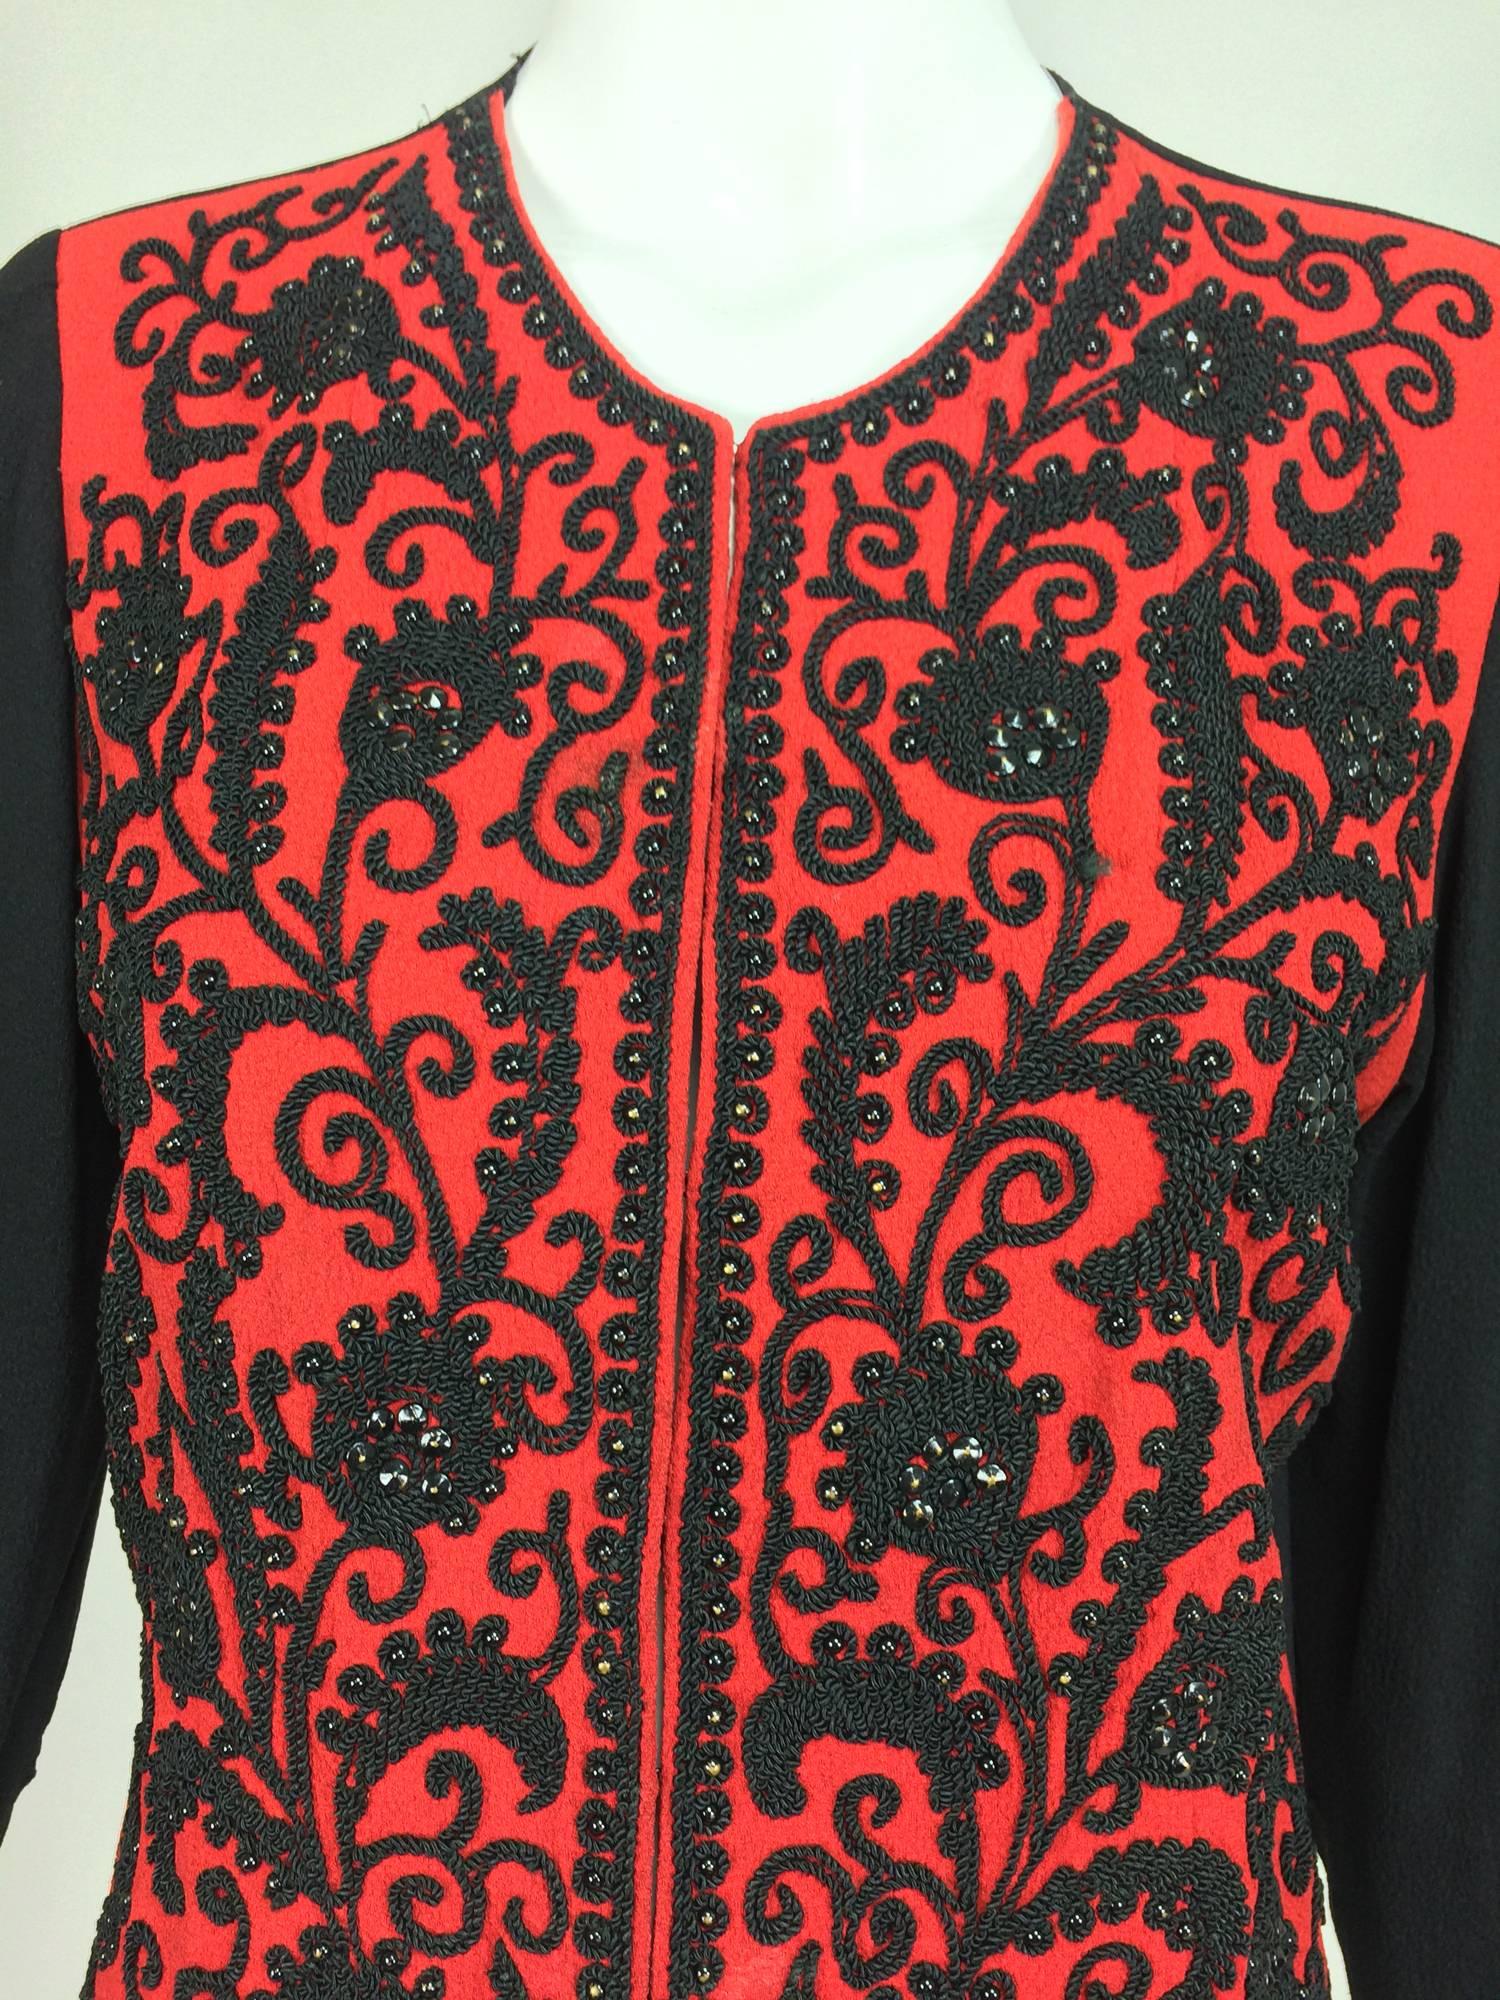 Passementerie, beaded long sleeve jacket in red and black crepe...Stunning jacket from the 30s, the front panels are heavily decorated in black twisted cord and black beads, the black decoration really pops against the red crepe...The sleeves and